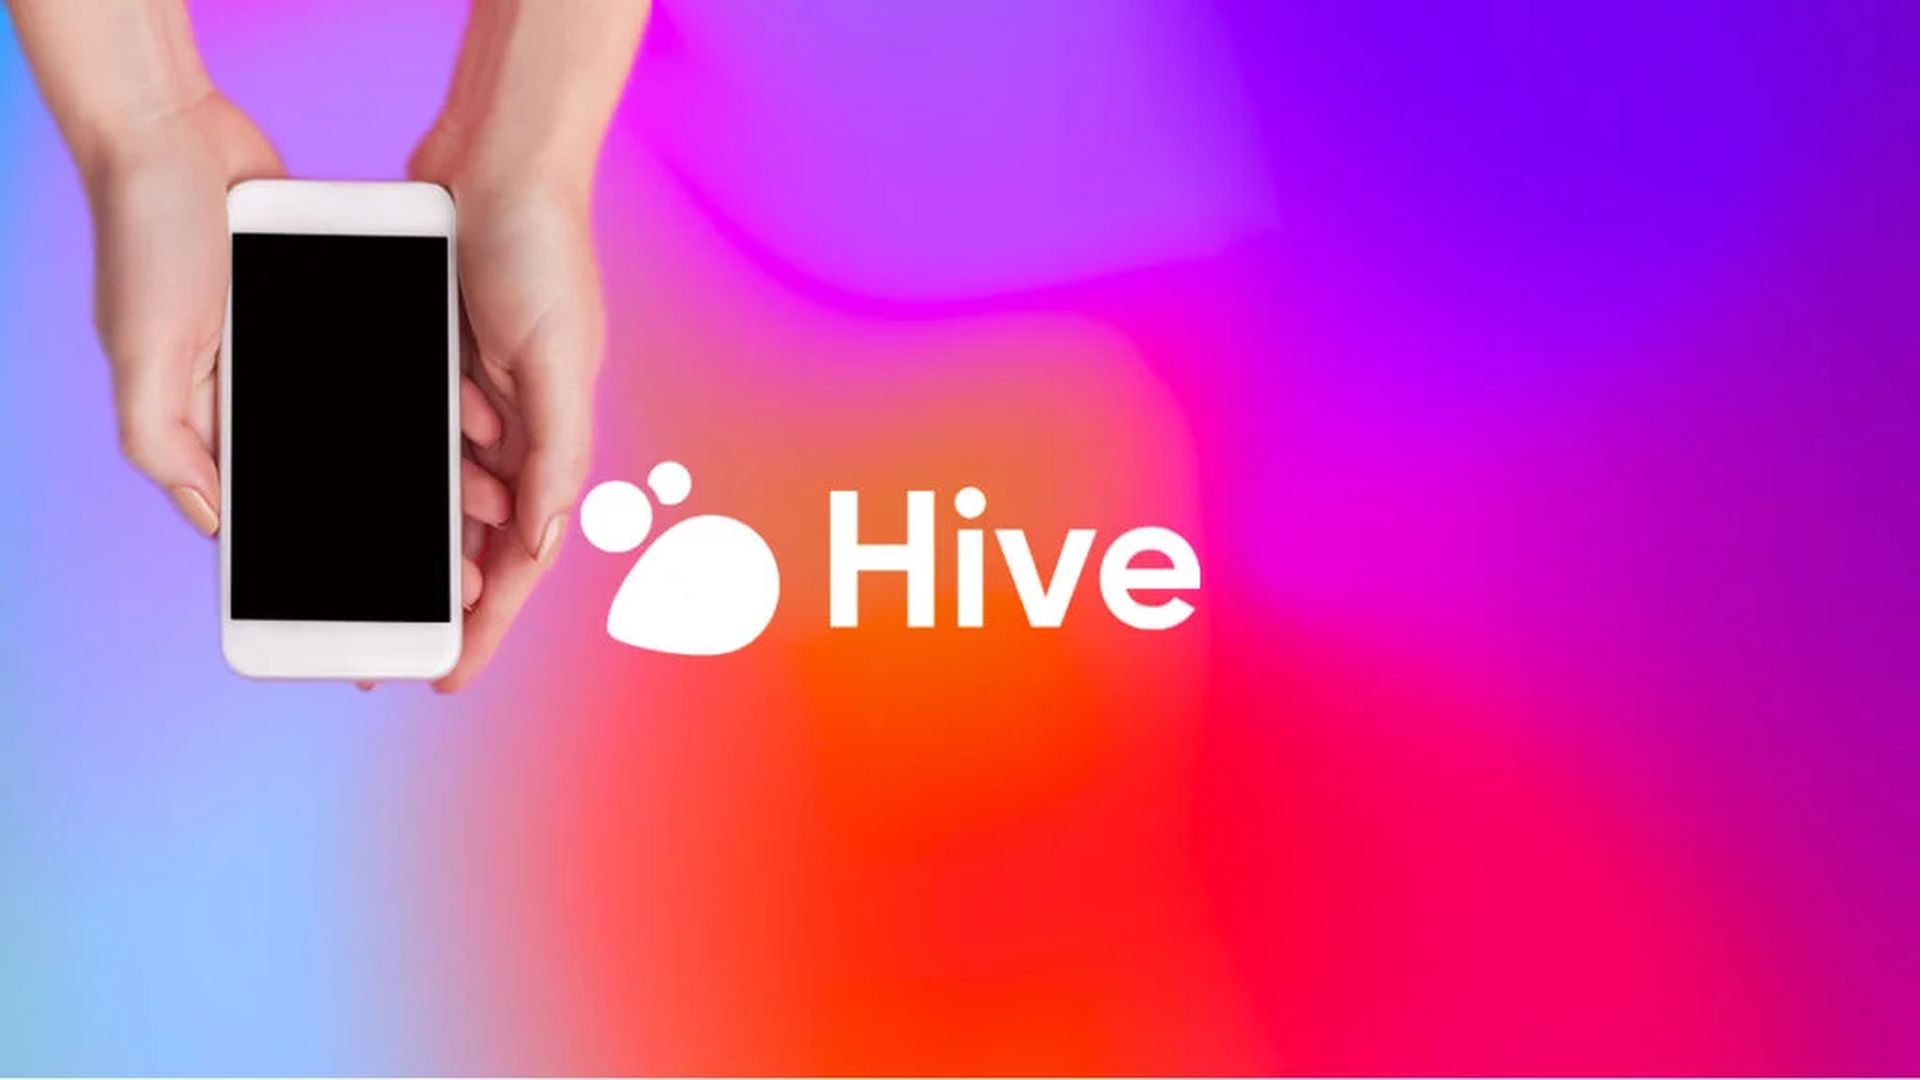 On Hive Social you can upload text, photographs, music, or videos